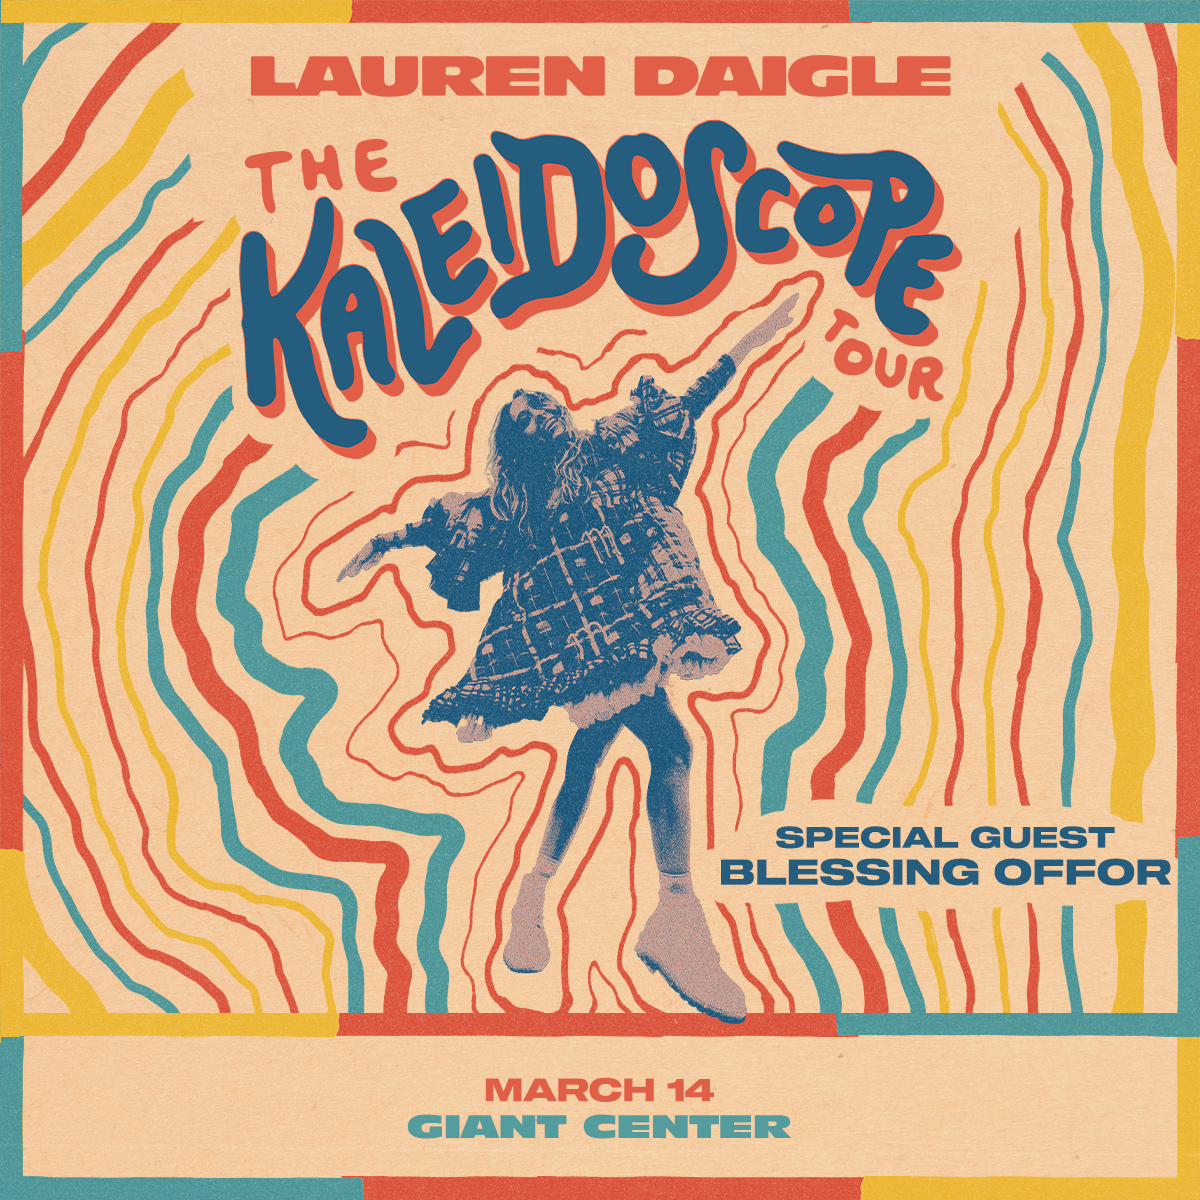 Have tickets to see @Lauren_Daigle? Important info: 🚪 Doors at 6 PM | Show starts at 7 PM. 👜 Bags larger than 5'x8'x1' are prohibited. 🚗 Parking is $25 if purchased online in advance or $35 on-site. Save: bit.ly/4bO02nJ 💳 We are cashless. 🎫 bit.ly/4770H0u